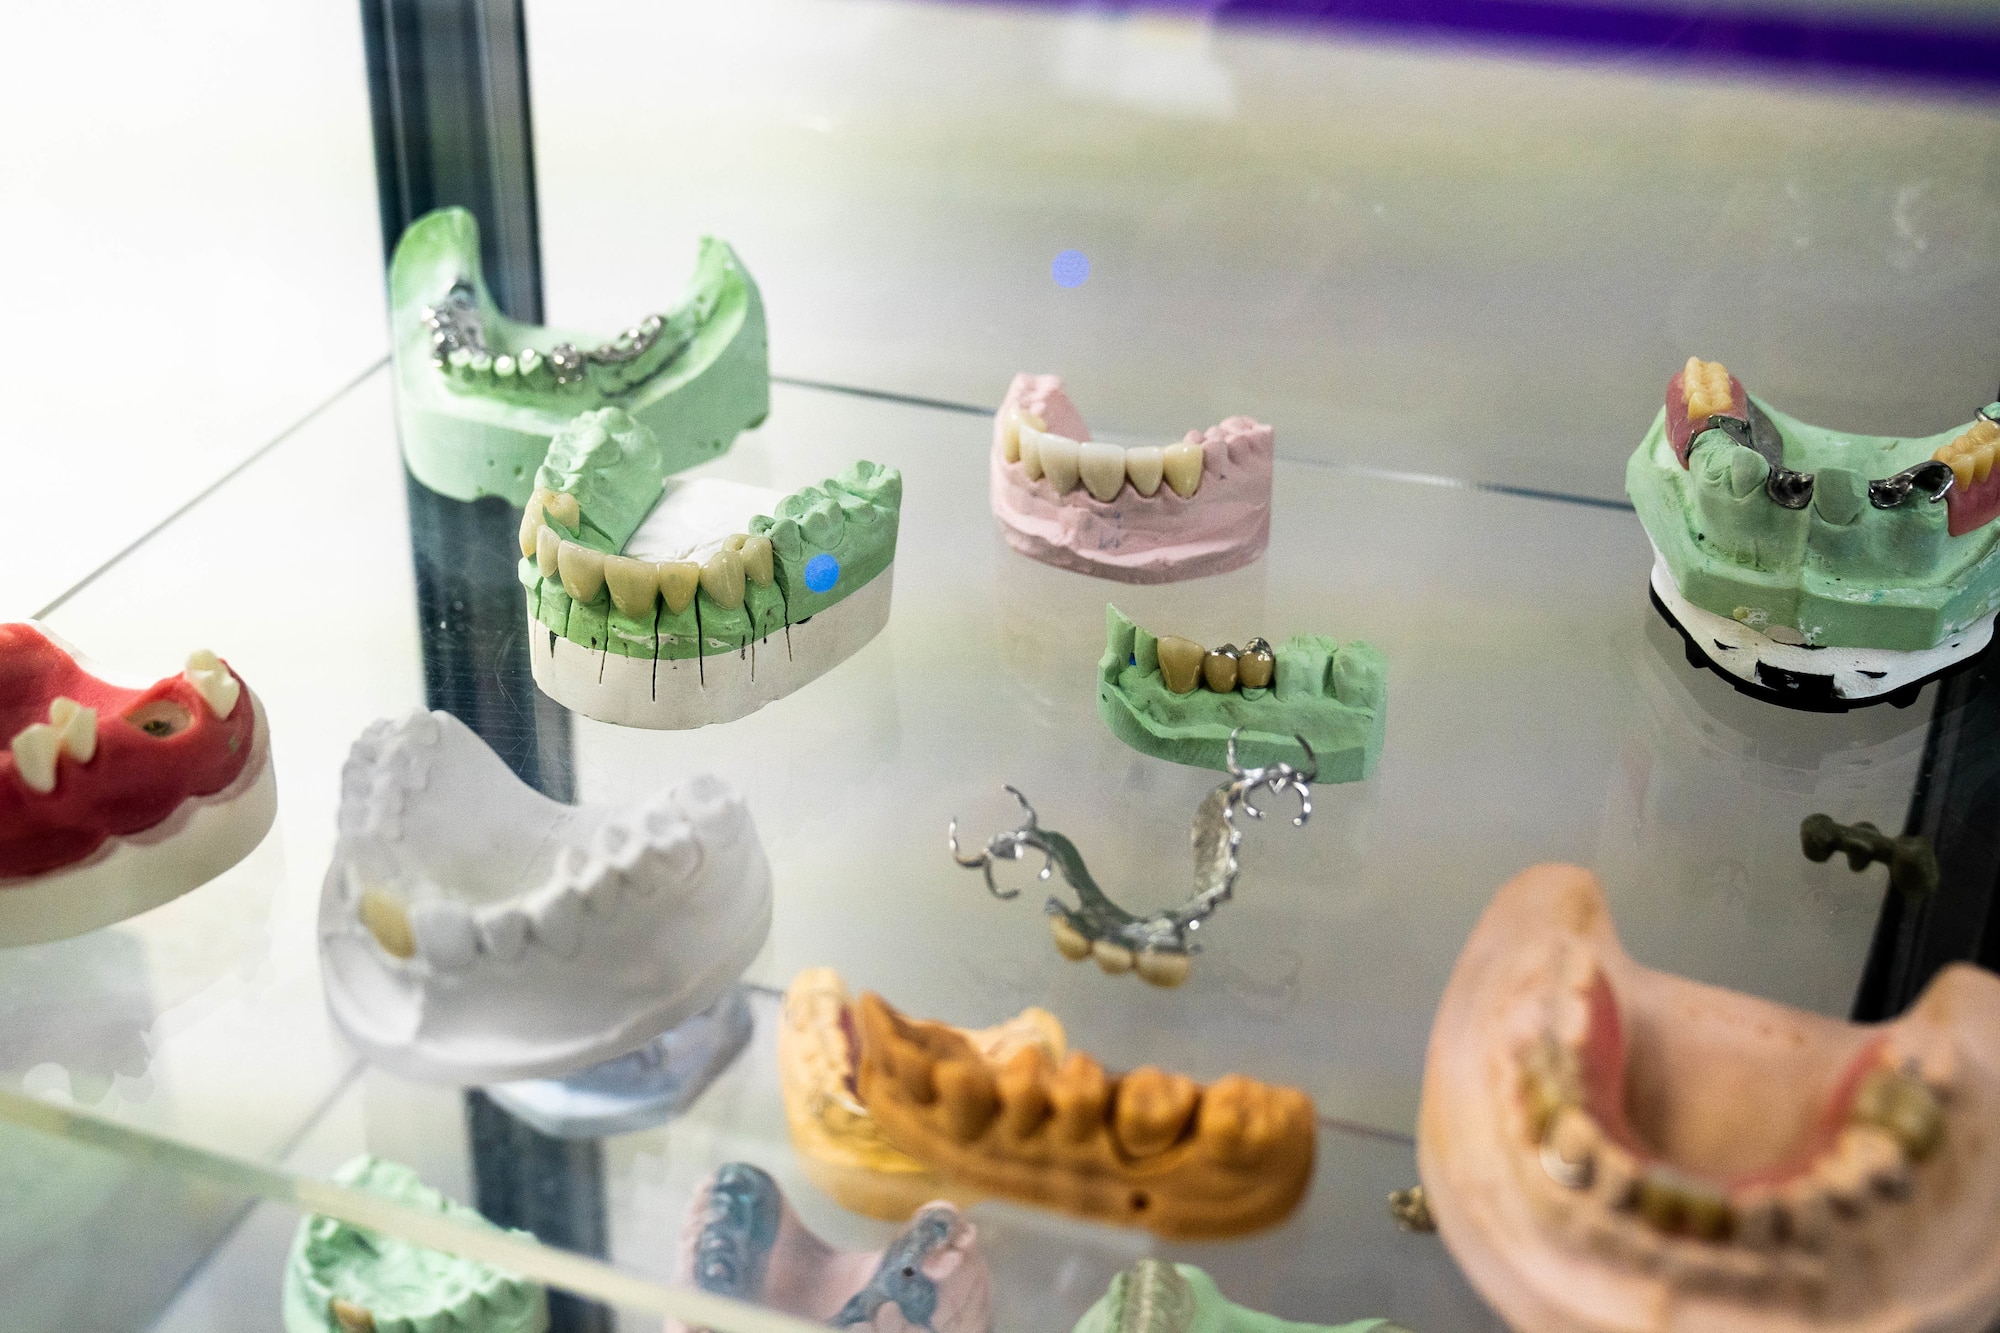 A display of model impressions and retainers sits in the dental lab at Joint Base Pearl Harbor-Hickam, Hawaii, April 5, 2022. Dental technicians take impressions of the patient’s mouth to design and 3D print crowns, retainers, night guards and other forms of dental gear. (U.S. Air Force photo by Airman 1st Class Makensie Cooper)